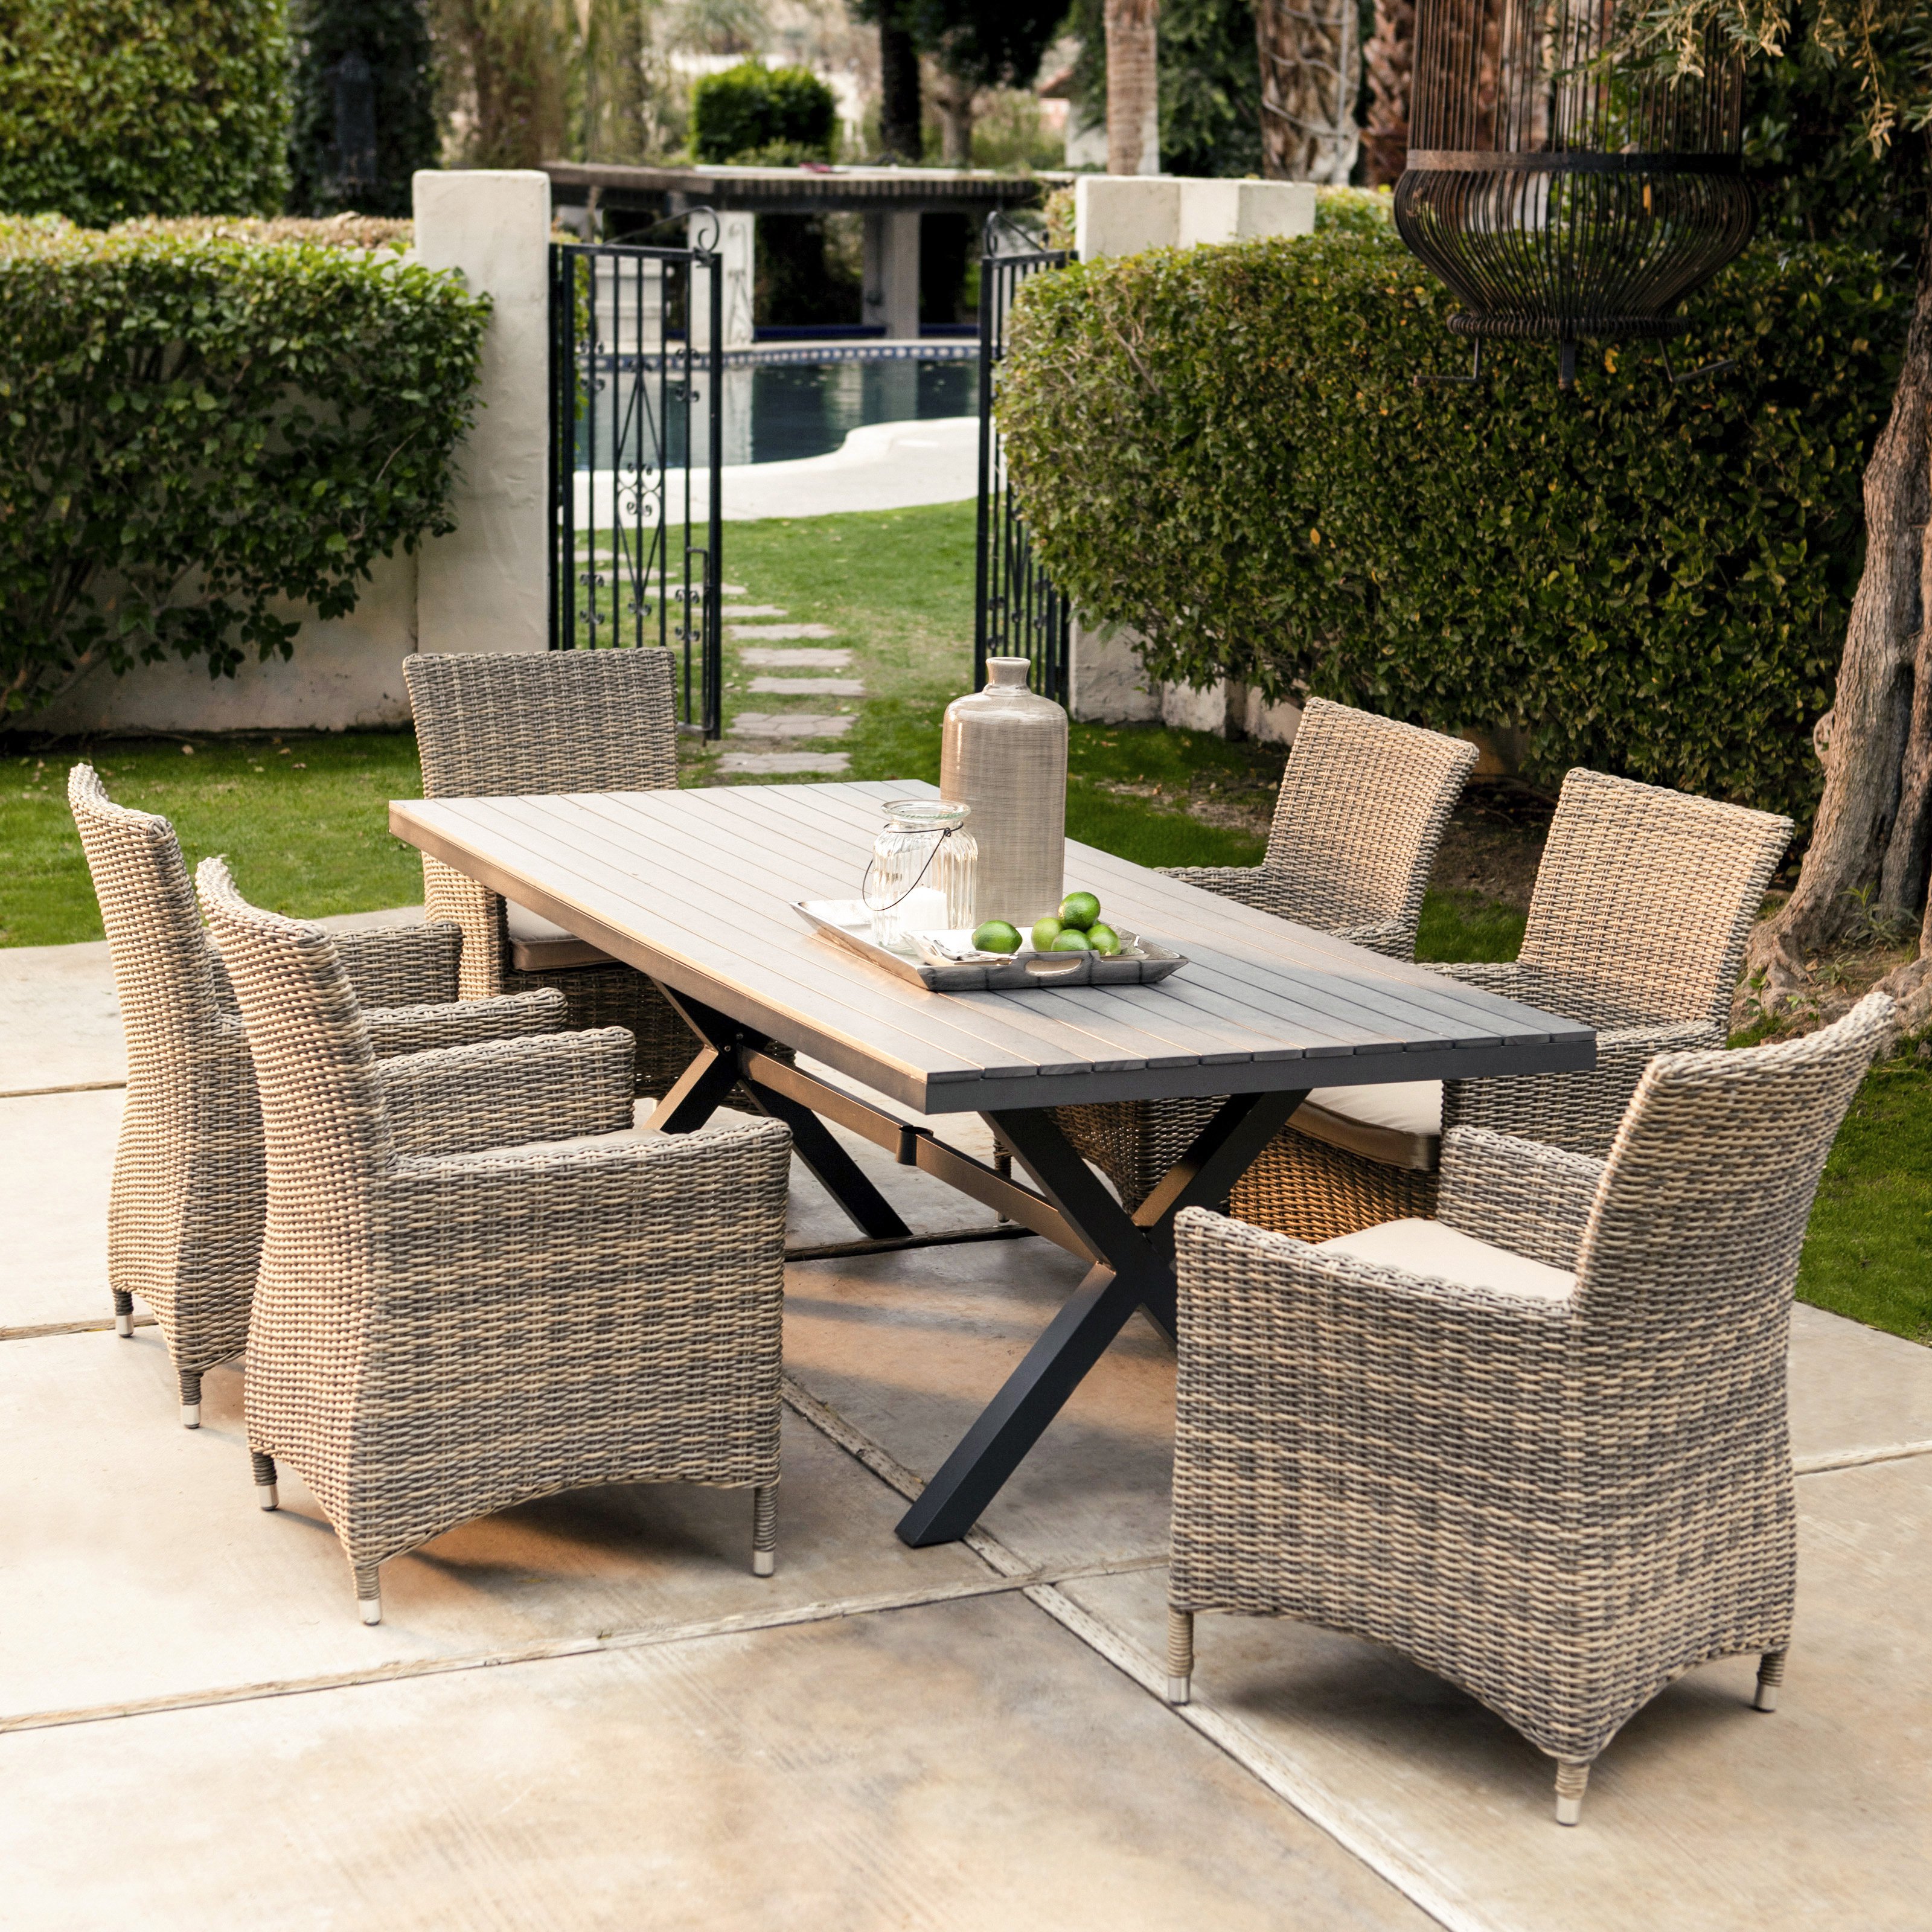 Classy Patio Dining Sets for a great Dine